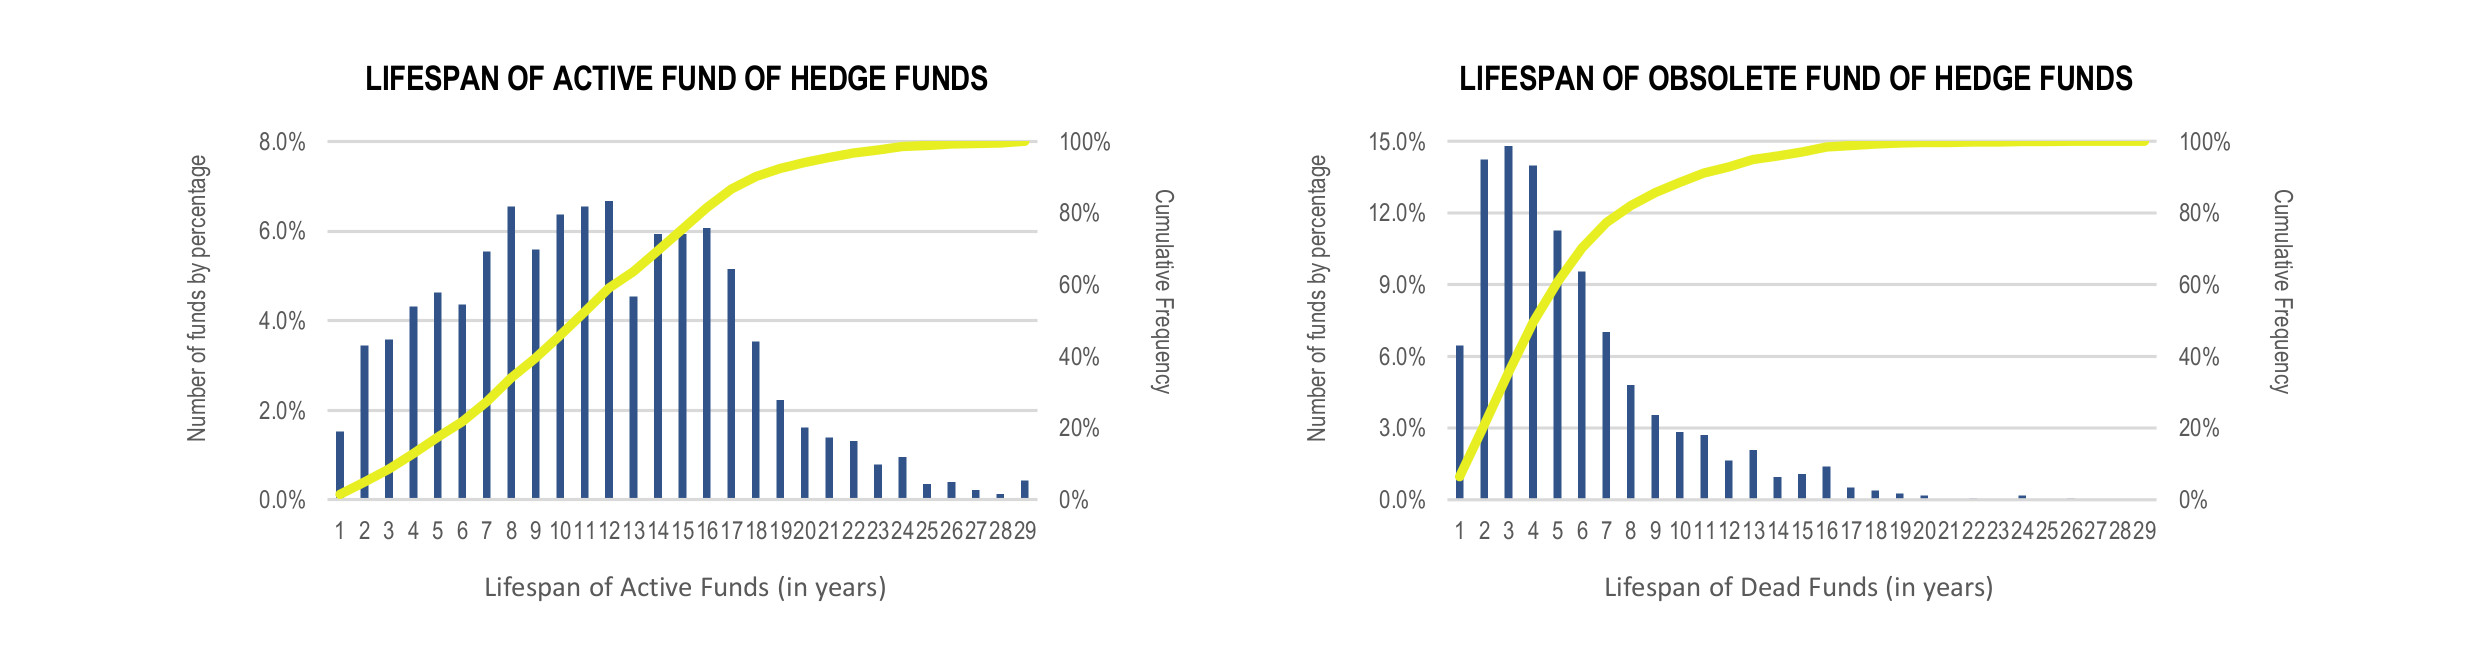 Funds of Hedge Funds Infographic March 2021 - lifespan of active and obsolete funds